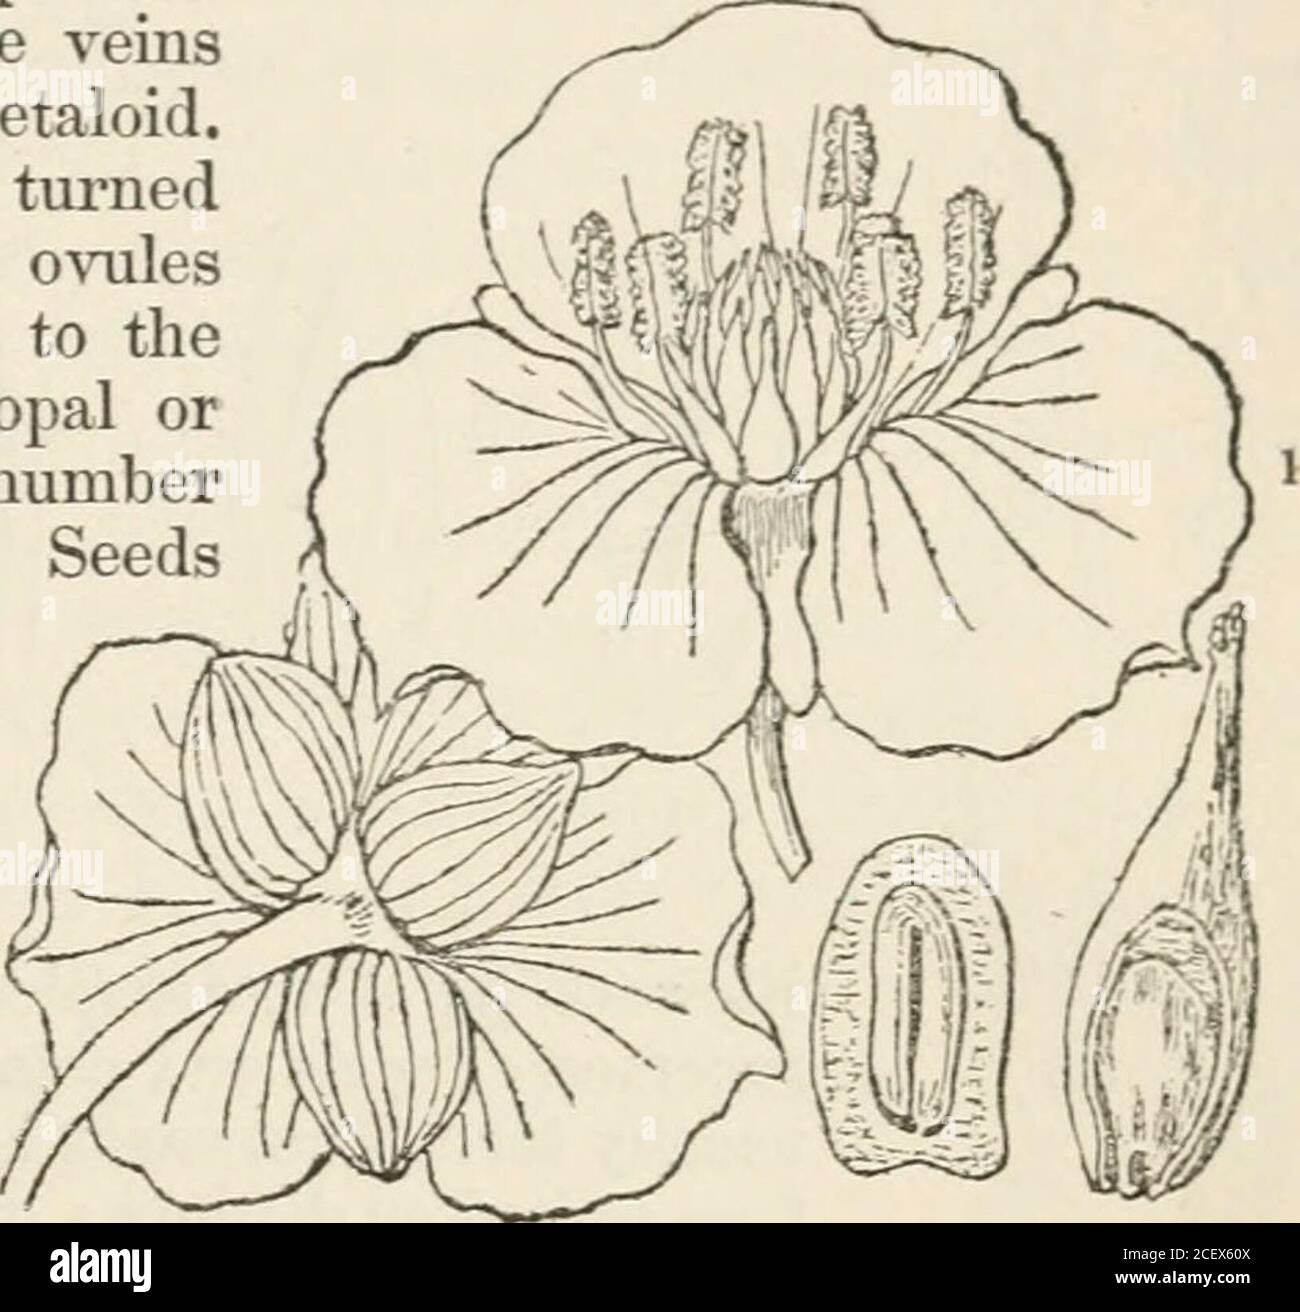 . The vegetable kingdom : or, The structure, classification, and uses of plants, illustrated upon the natural system. n* embryos were calledby the late L. C. Richard, macropodal. The truly diclinous flowers of Sagittariaconstitute a great and unusual exception to the otherwise hermaphrodite structure ofthis Order. Chiefly natives of the northern parts of the world. Several Sagittarias and Damas-oniums inhabit the tropics, the former those of both hemispheres. Many have a fleshy rhizome, wliich is eatable ; such are Alisma and Sagittaria : aspecies of the latter, S. sinensis, is cultivated for Stock Photo